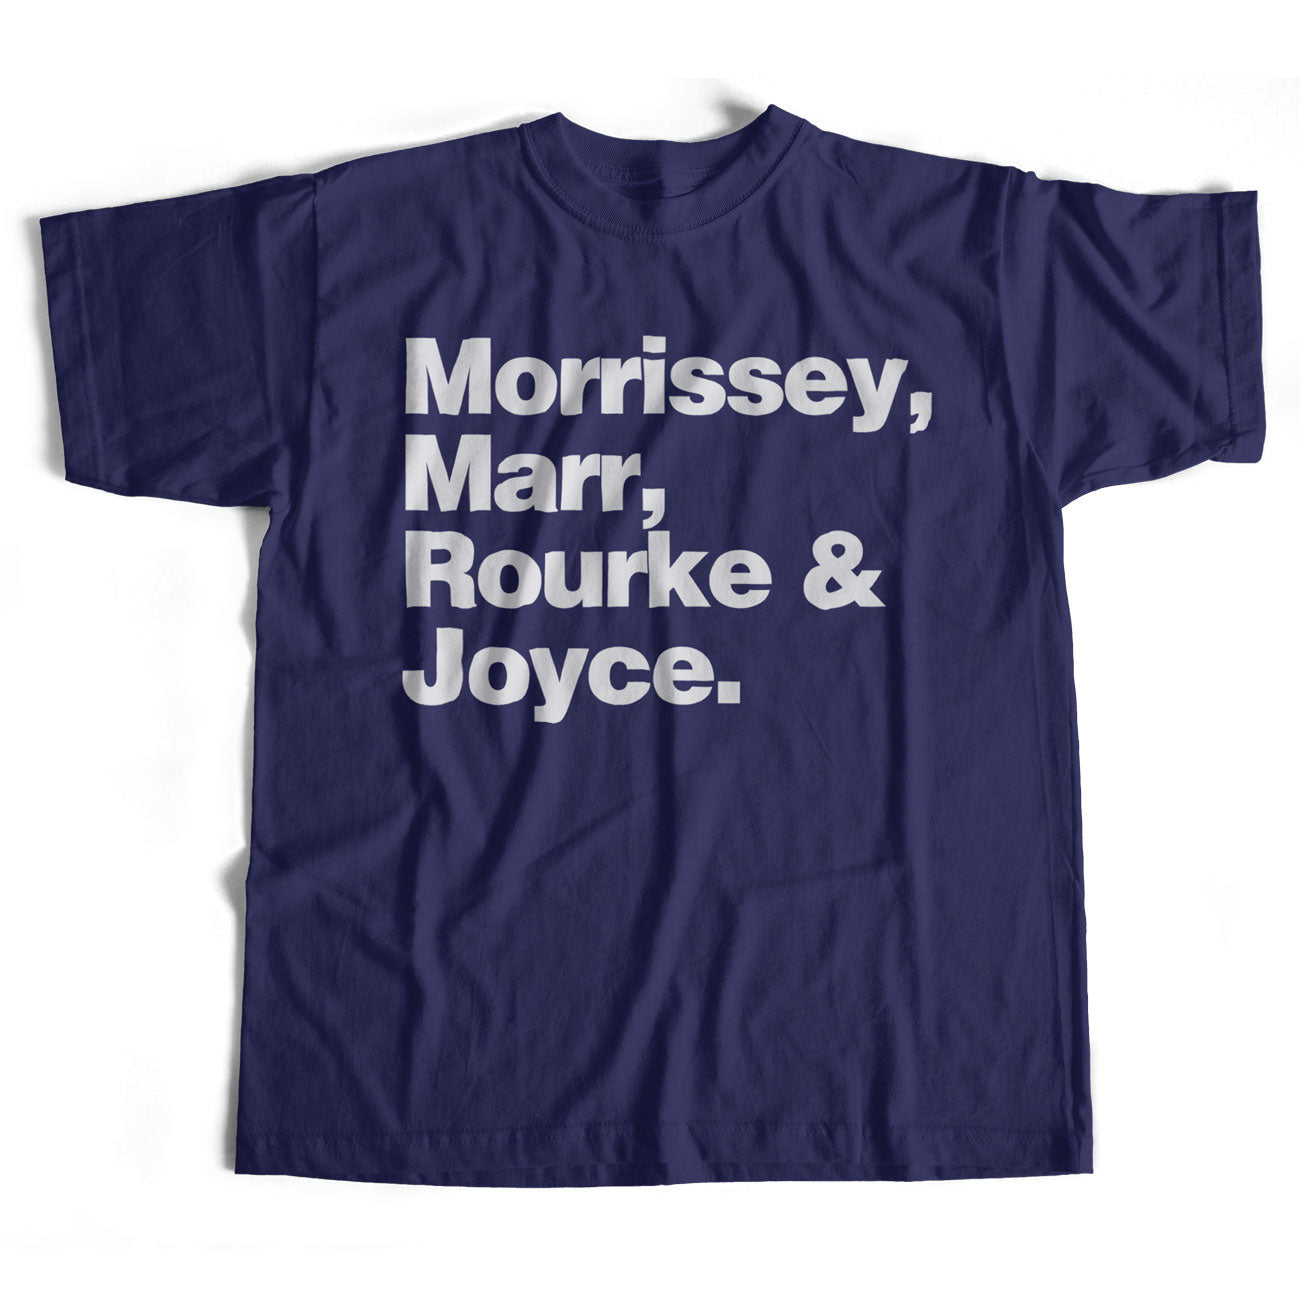 Morrissey, Marr, Rourke & Joyce Names T Shirt - A Tribute To The Smiths